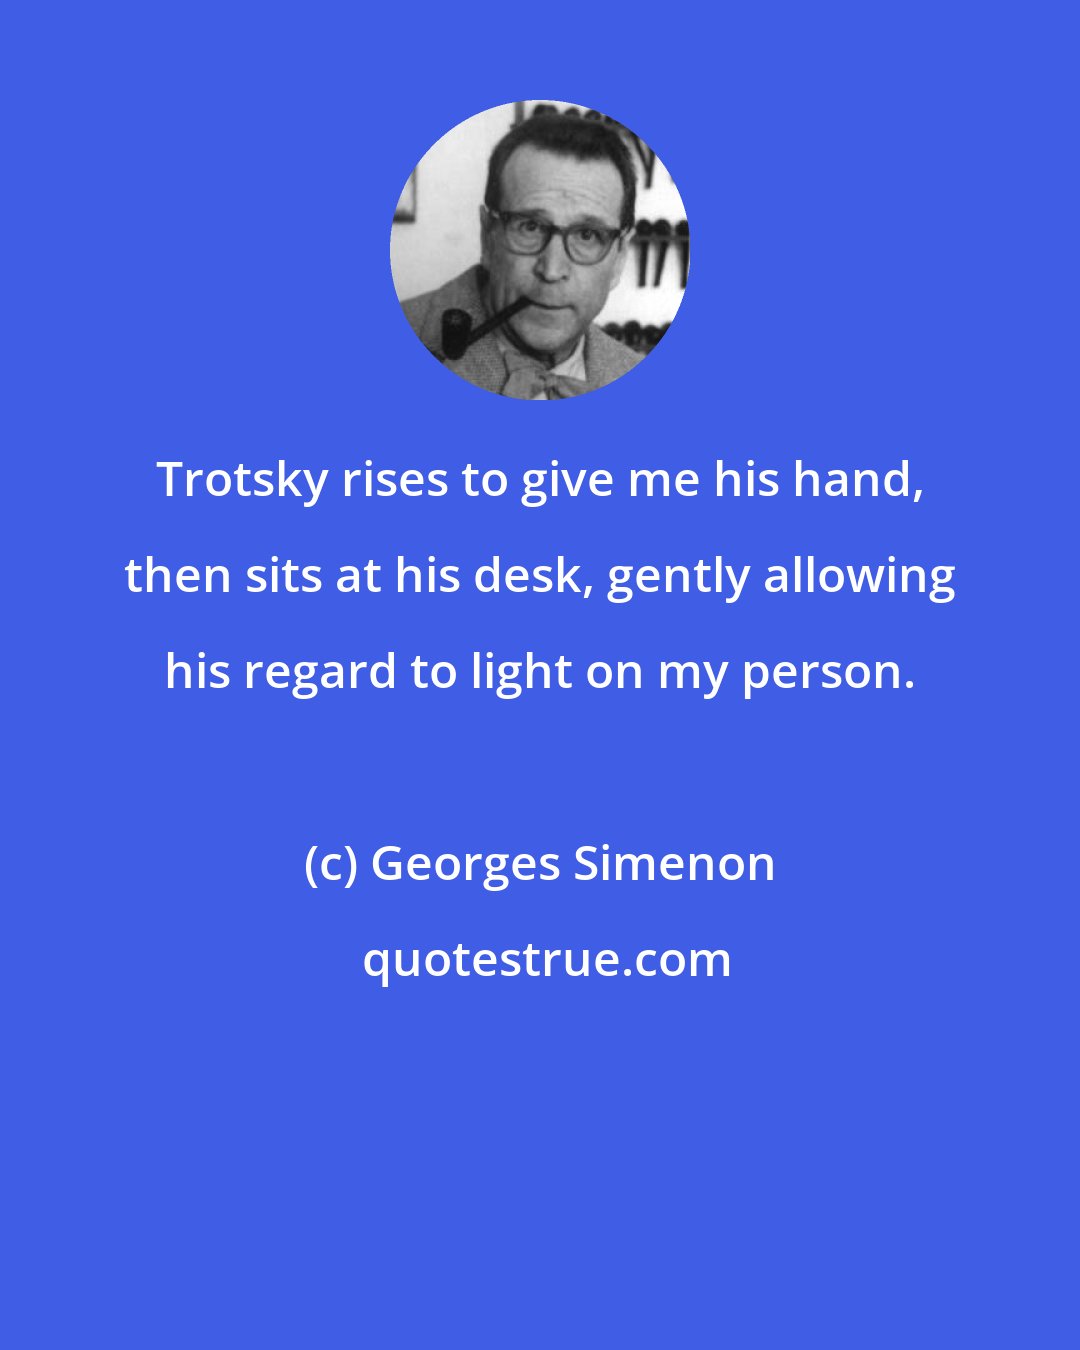 Georges Simenon: Trotsky rises to give me his hand, then sits at his desk, gently allowing his regard to light on my person.